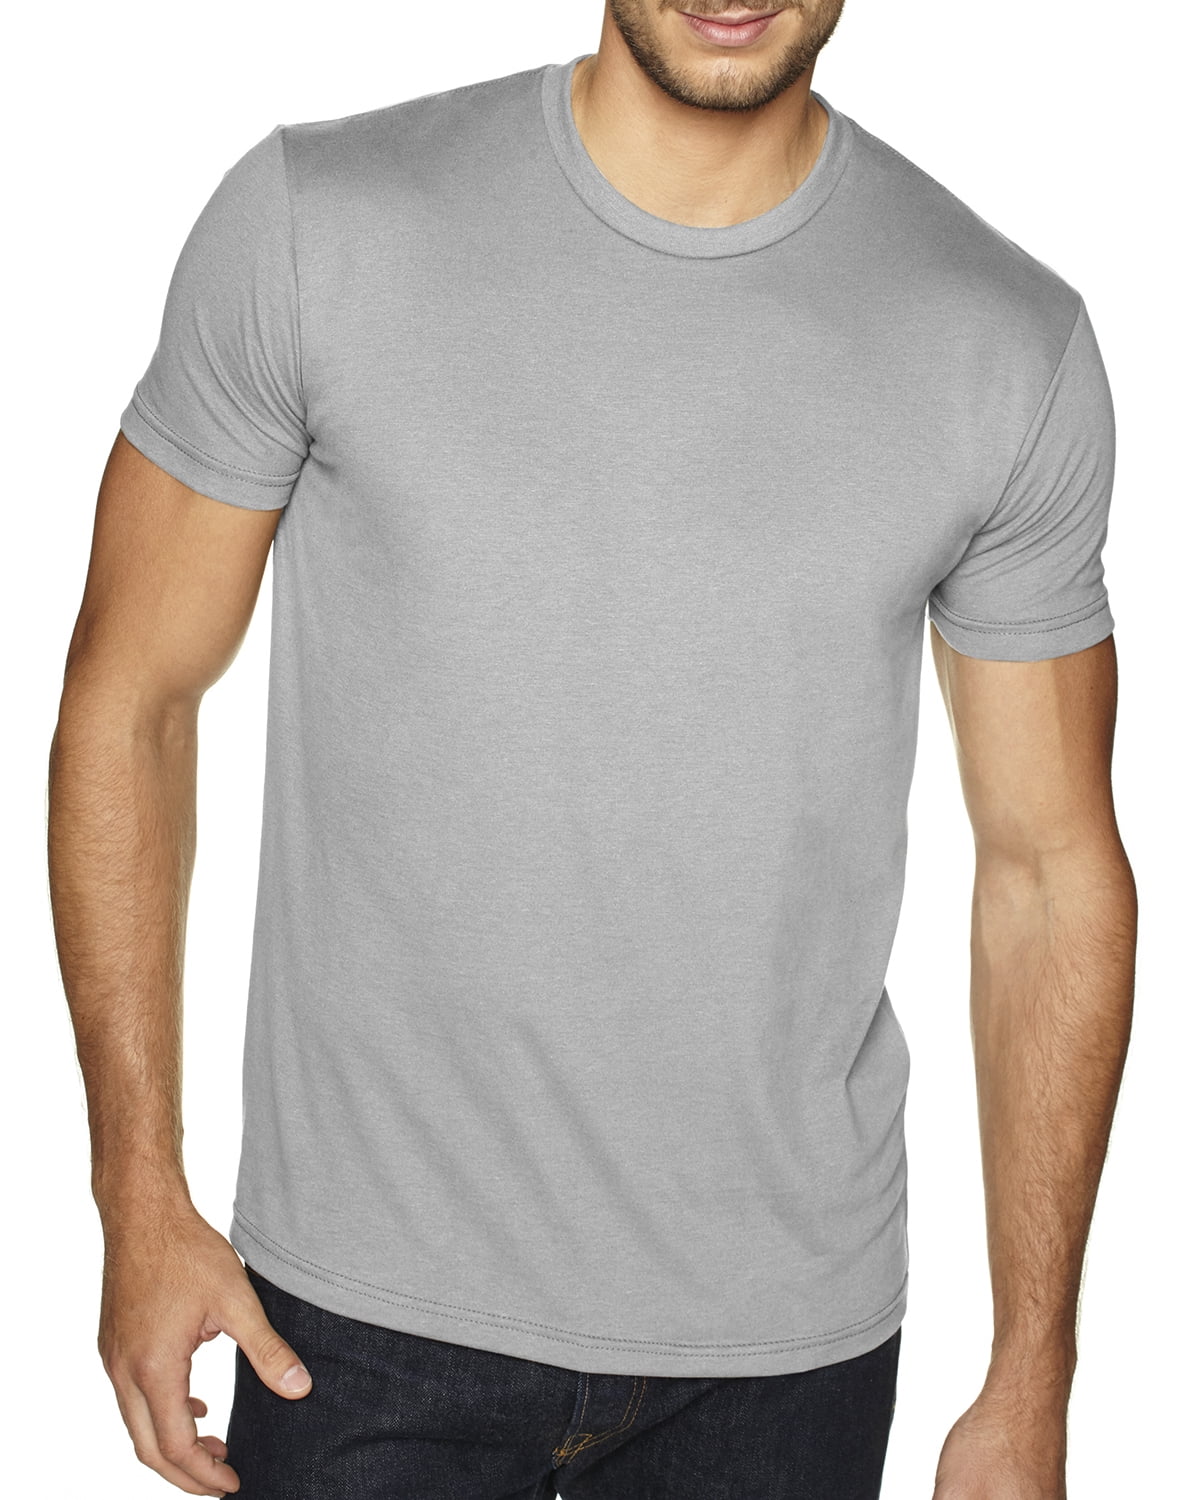 Clementine Apparel - Mens Clementine Premium Fitted Sueded Crew ...